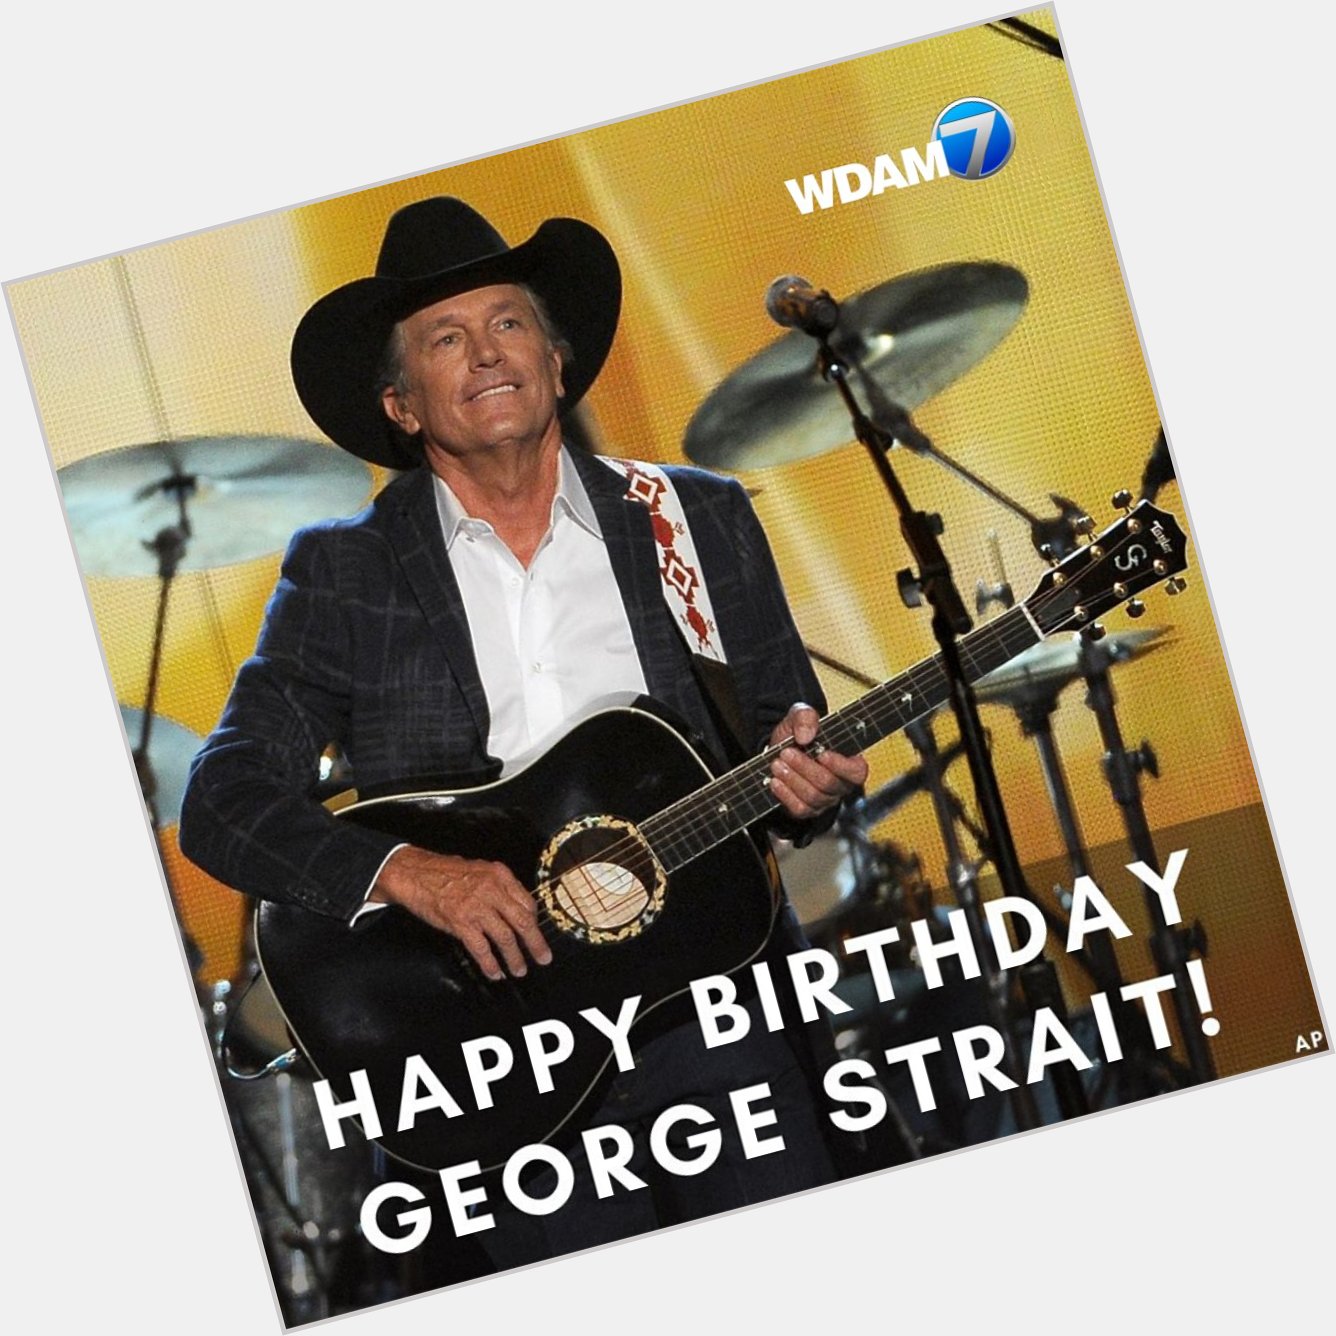 Help us wish a very happy 68th birthday to the one and only George Strait! 